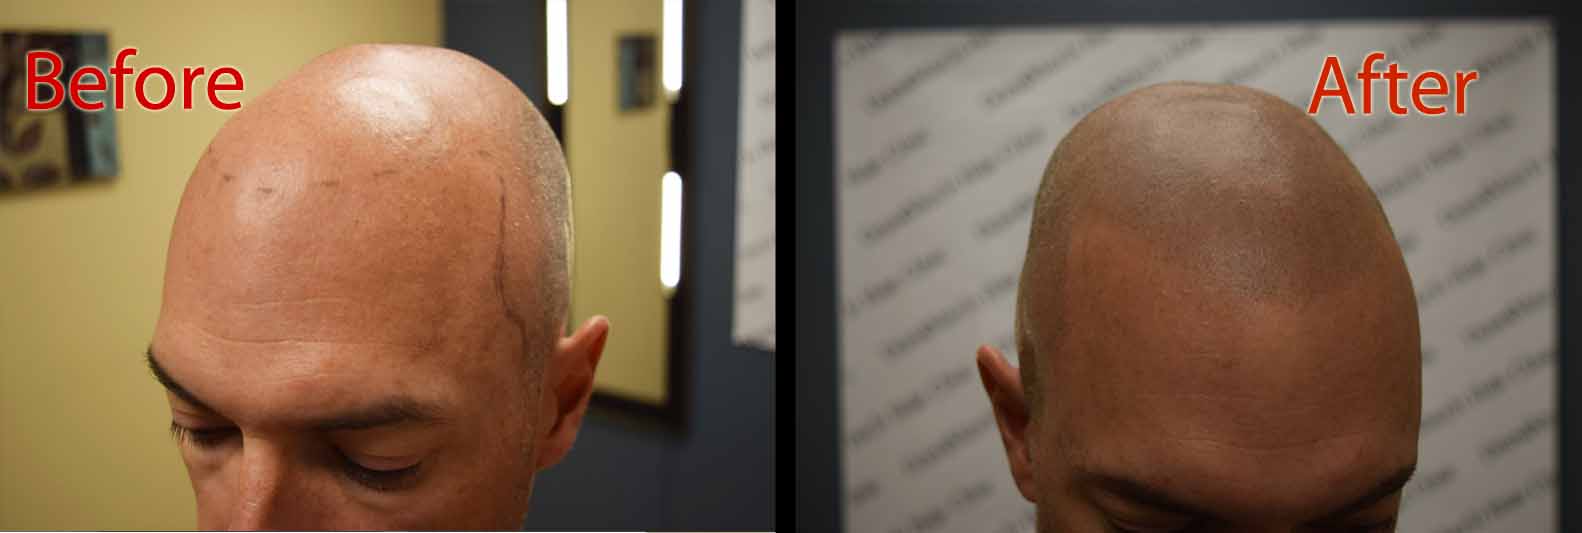 scalp micropigmentation smp for hair loss in arizona